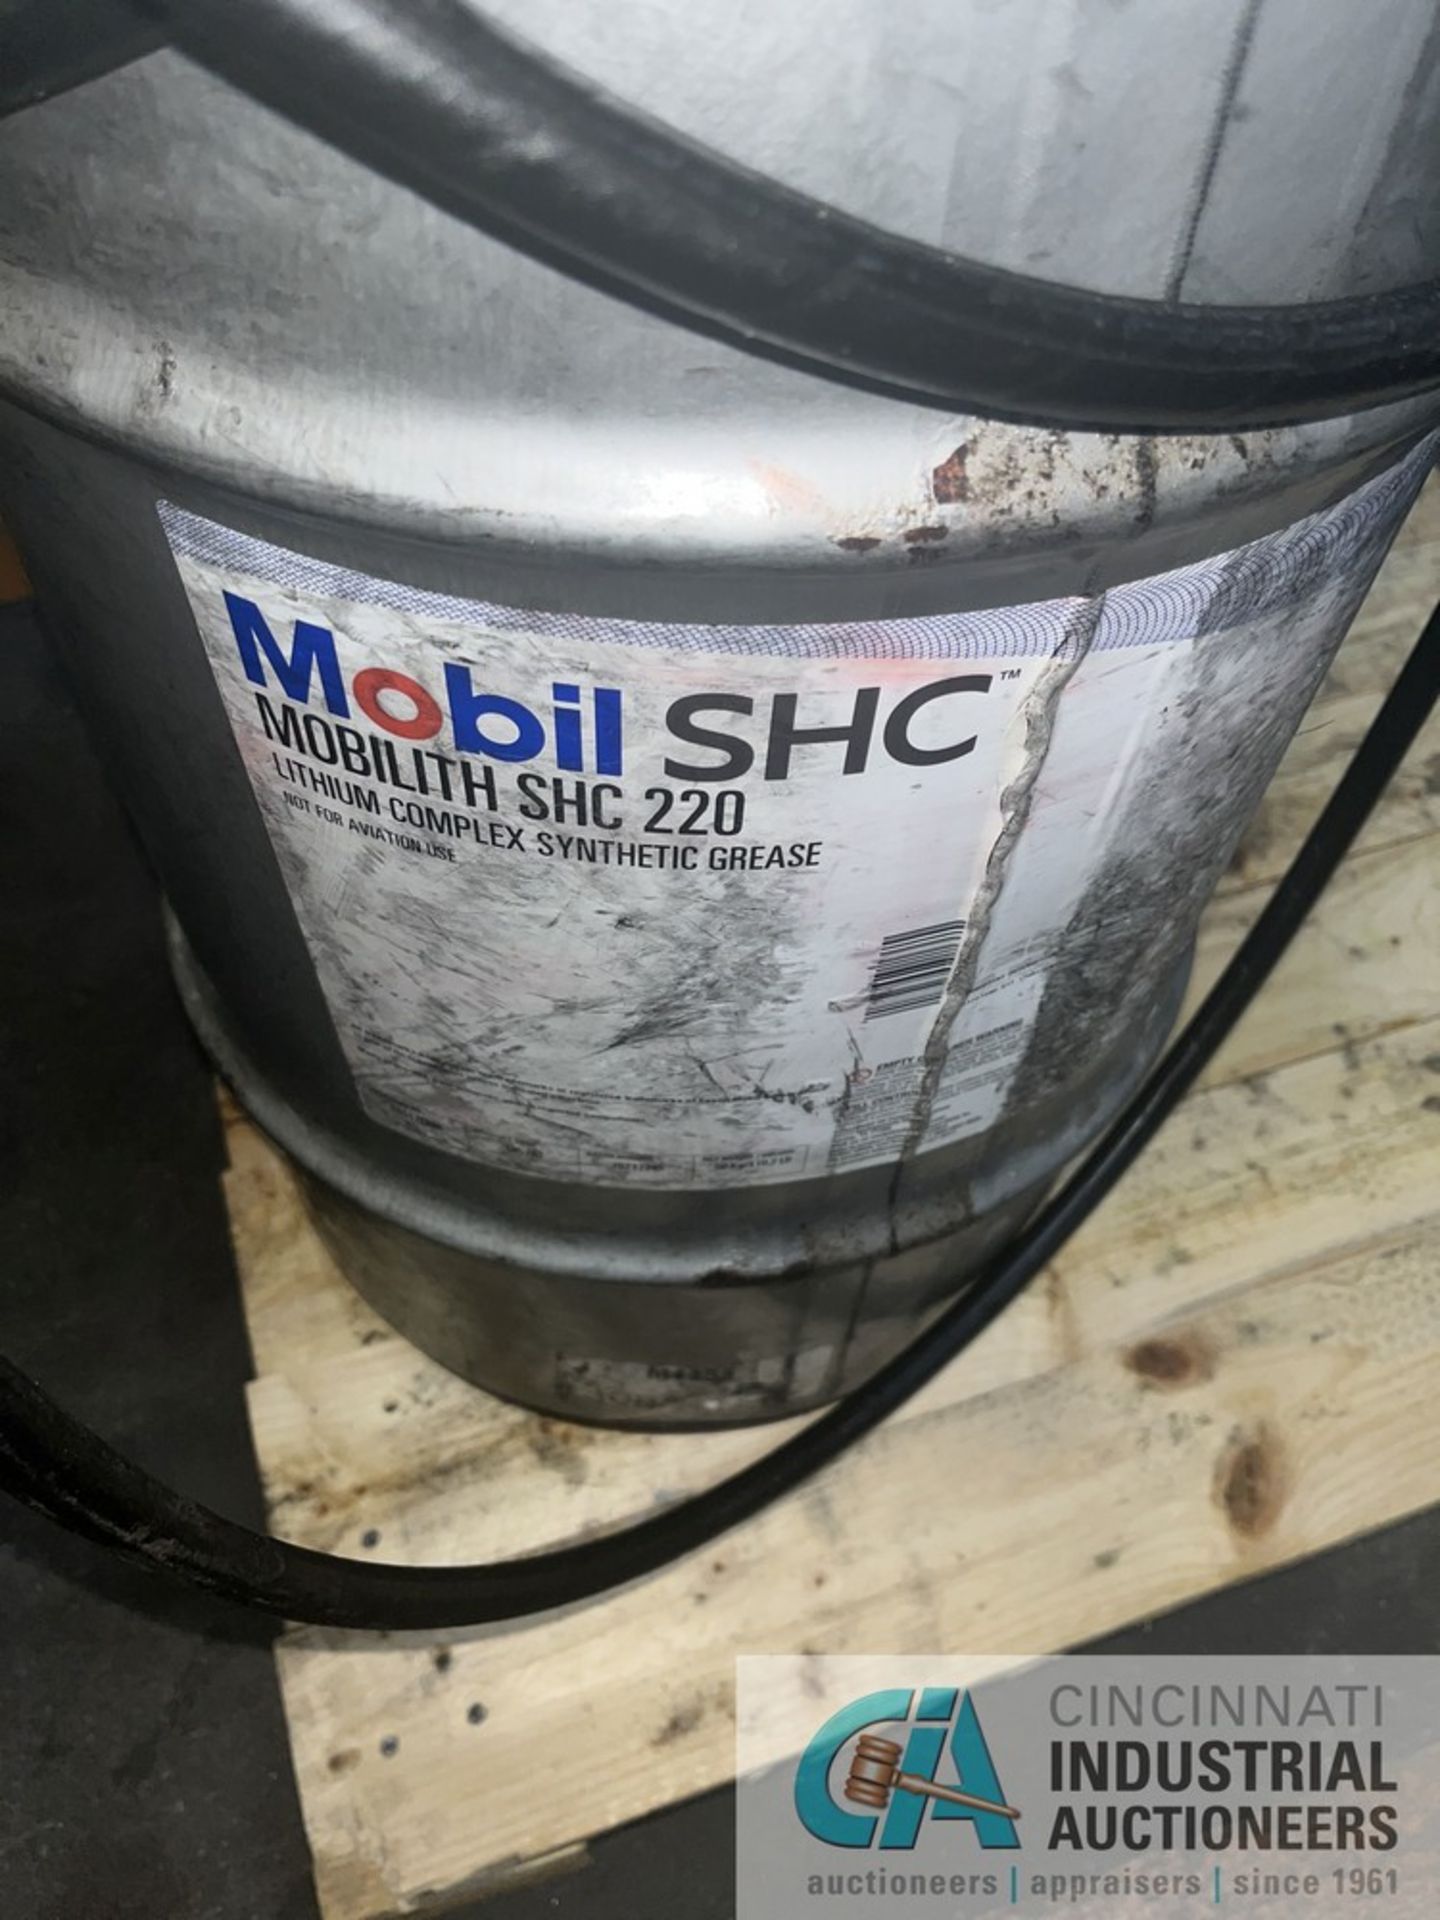 INGERSOLL RAND / ARO PNEUMATIC PUMP ON BARREL OF MOBIL SHC 220 GREASE - Image 4 of 4